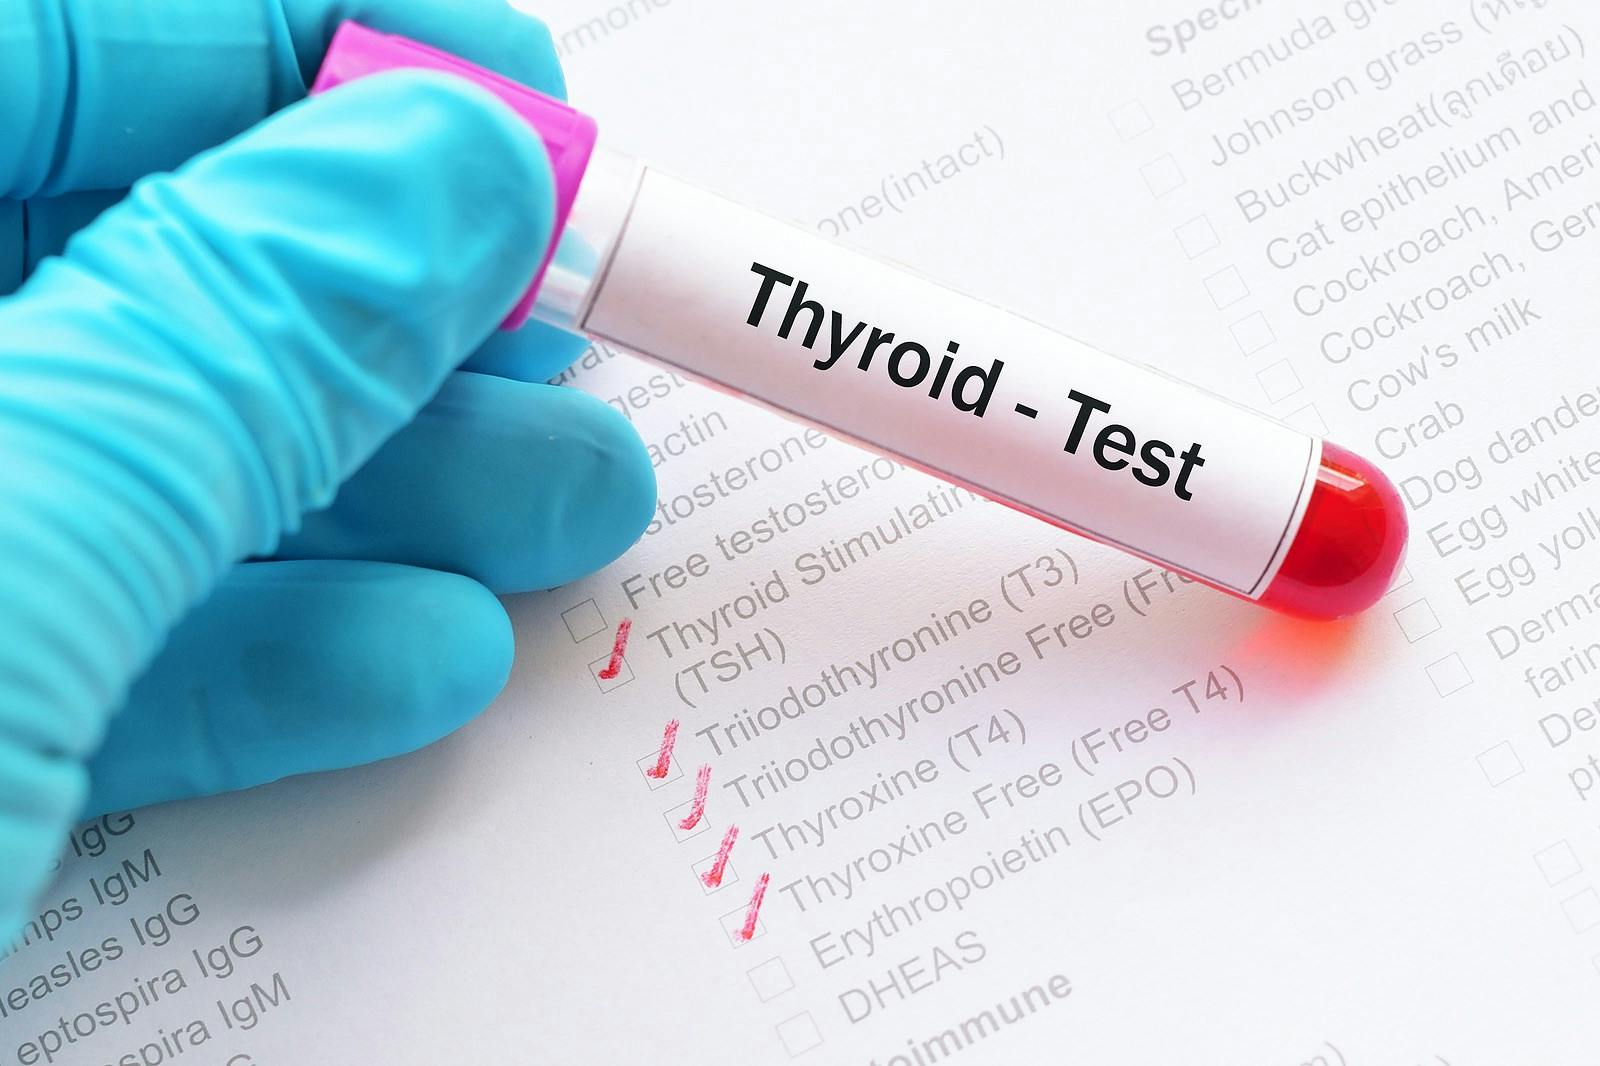 Thyroid test tube. Will levothyroxine alone normalize thyroid function?